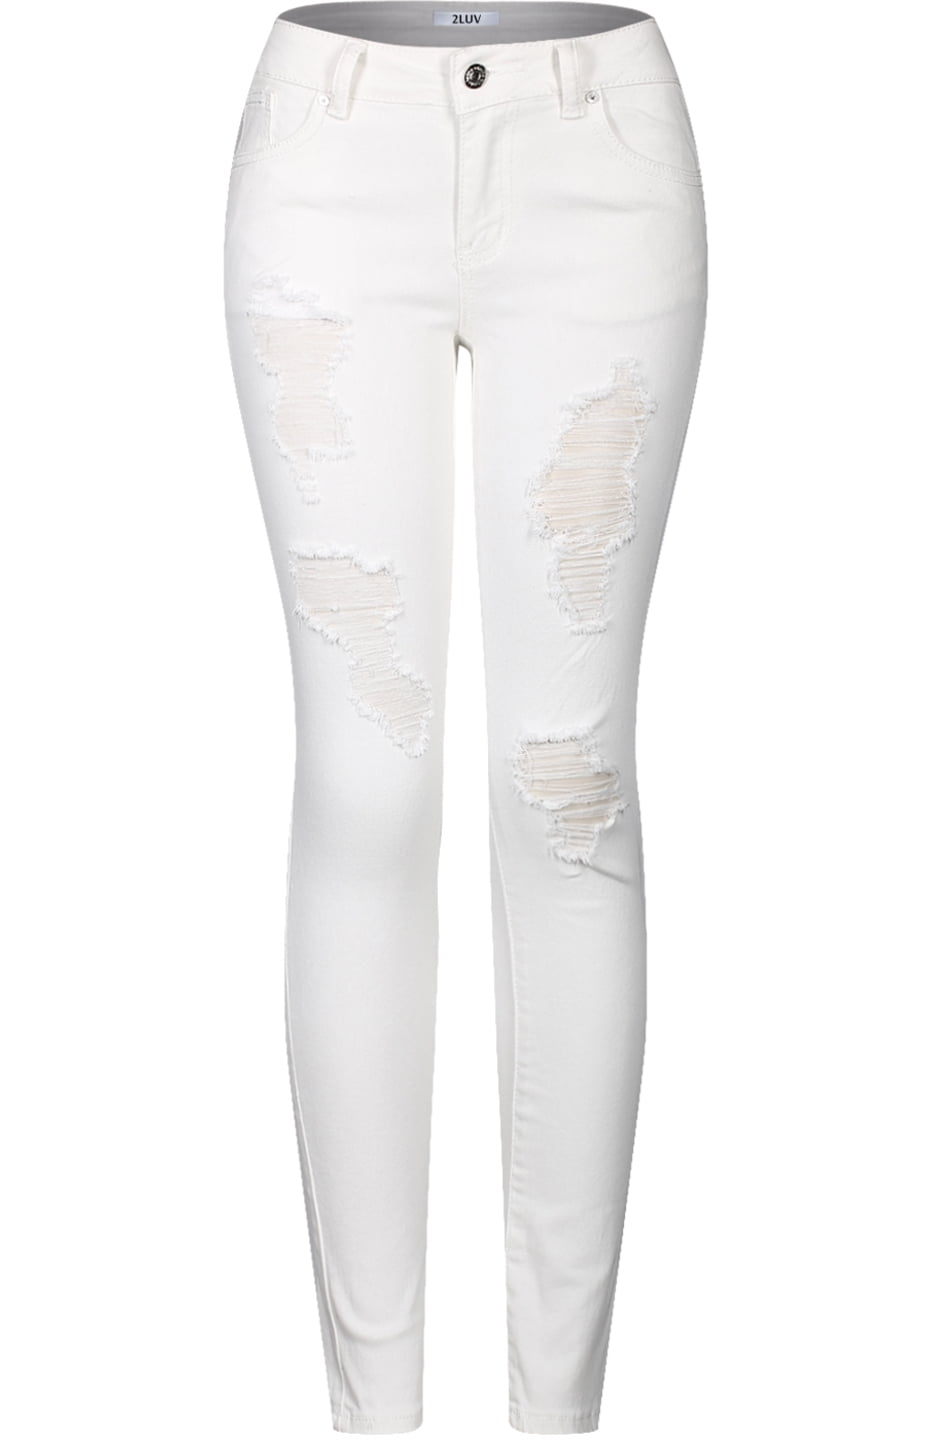 urban outfitters skinny jeans